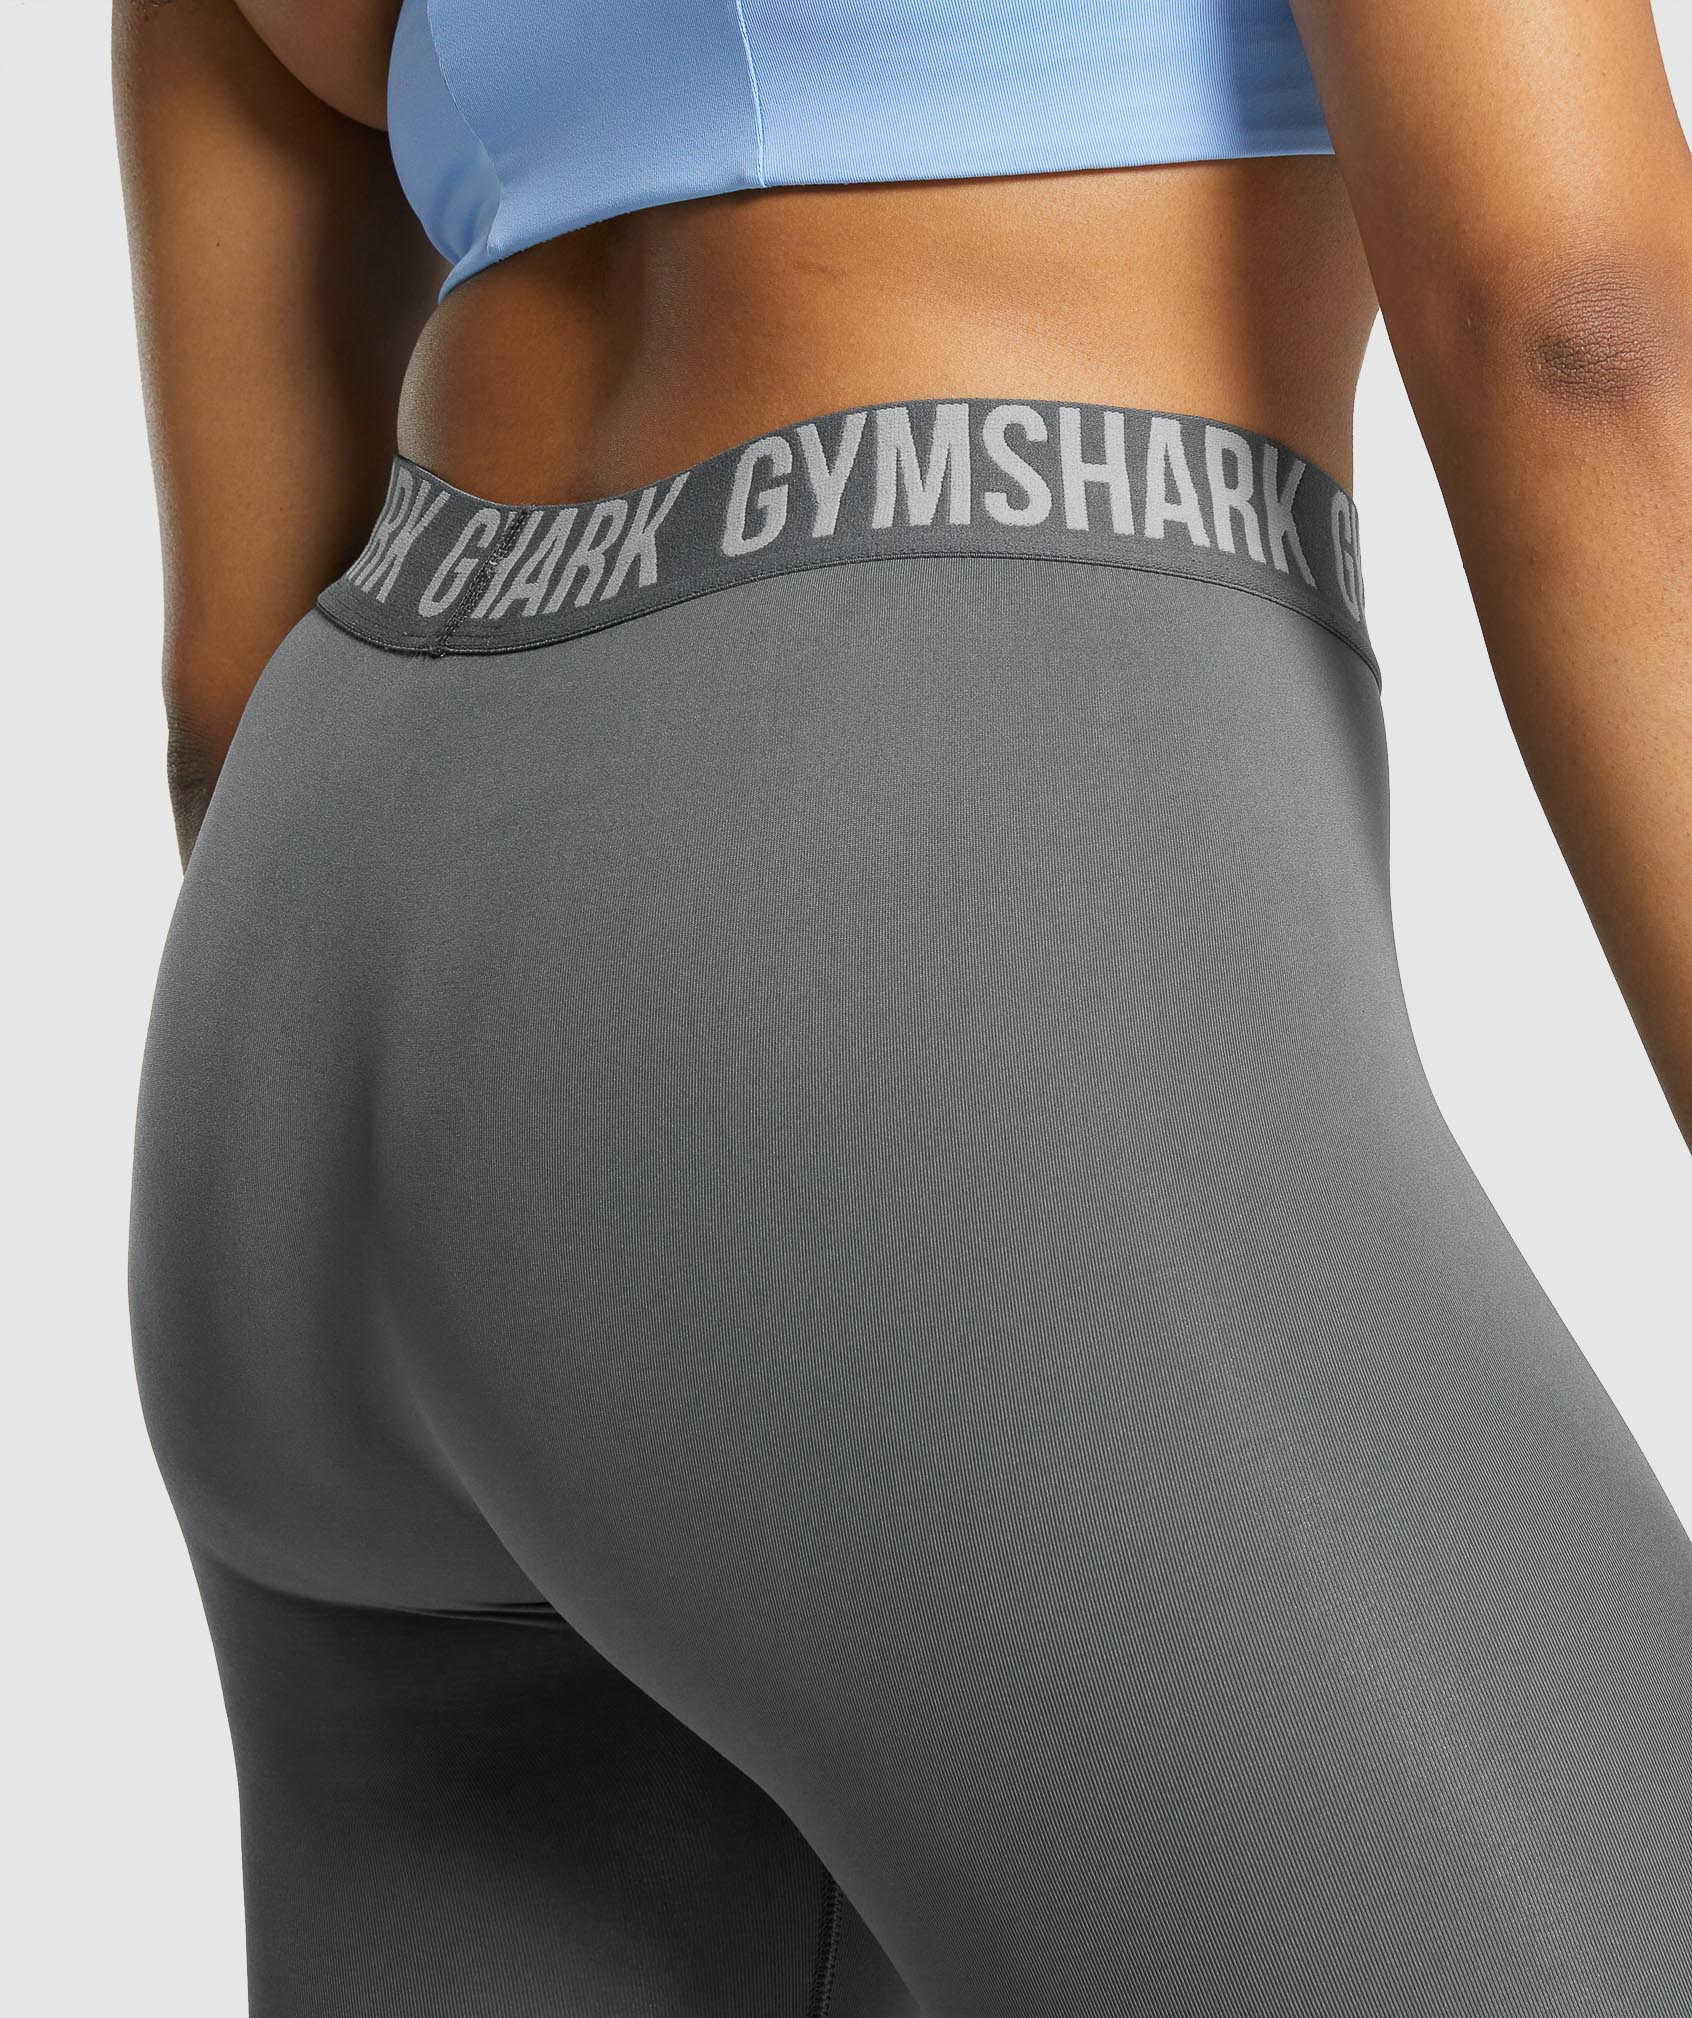 Gymshark grey cropped workout leggings size small